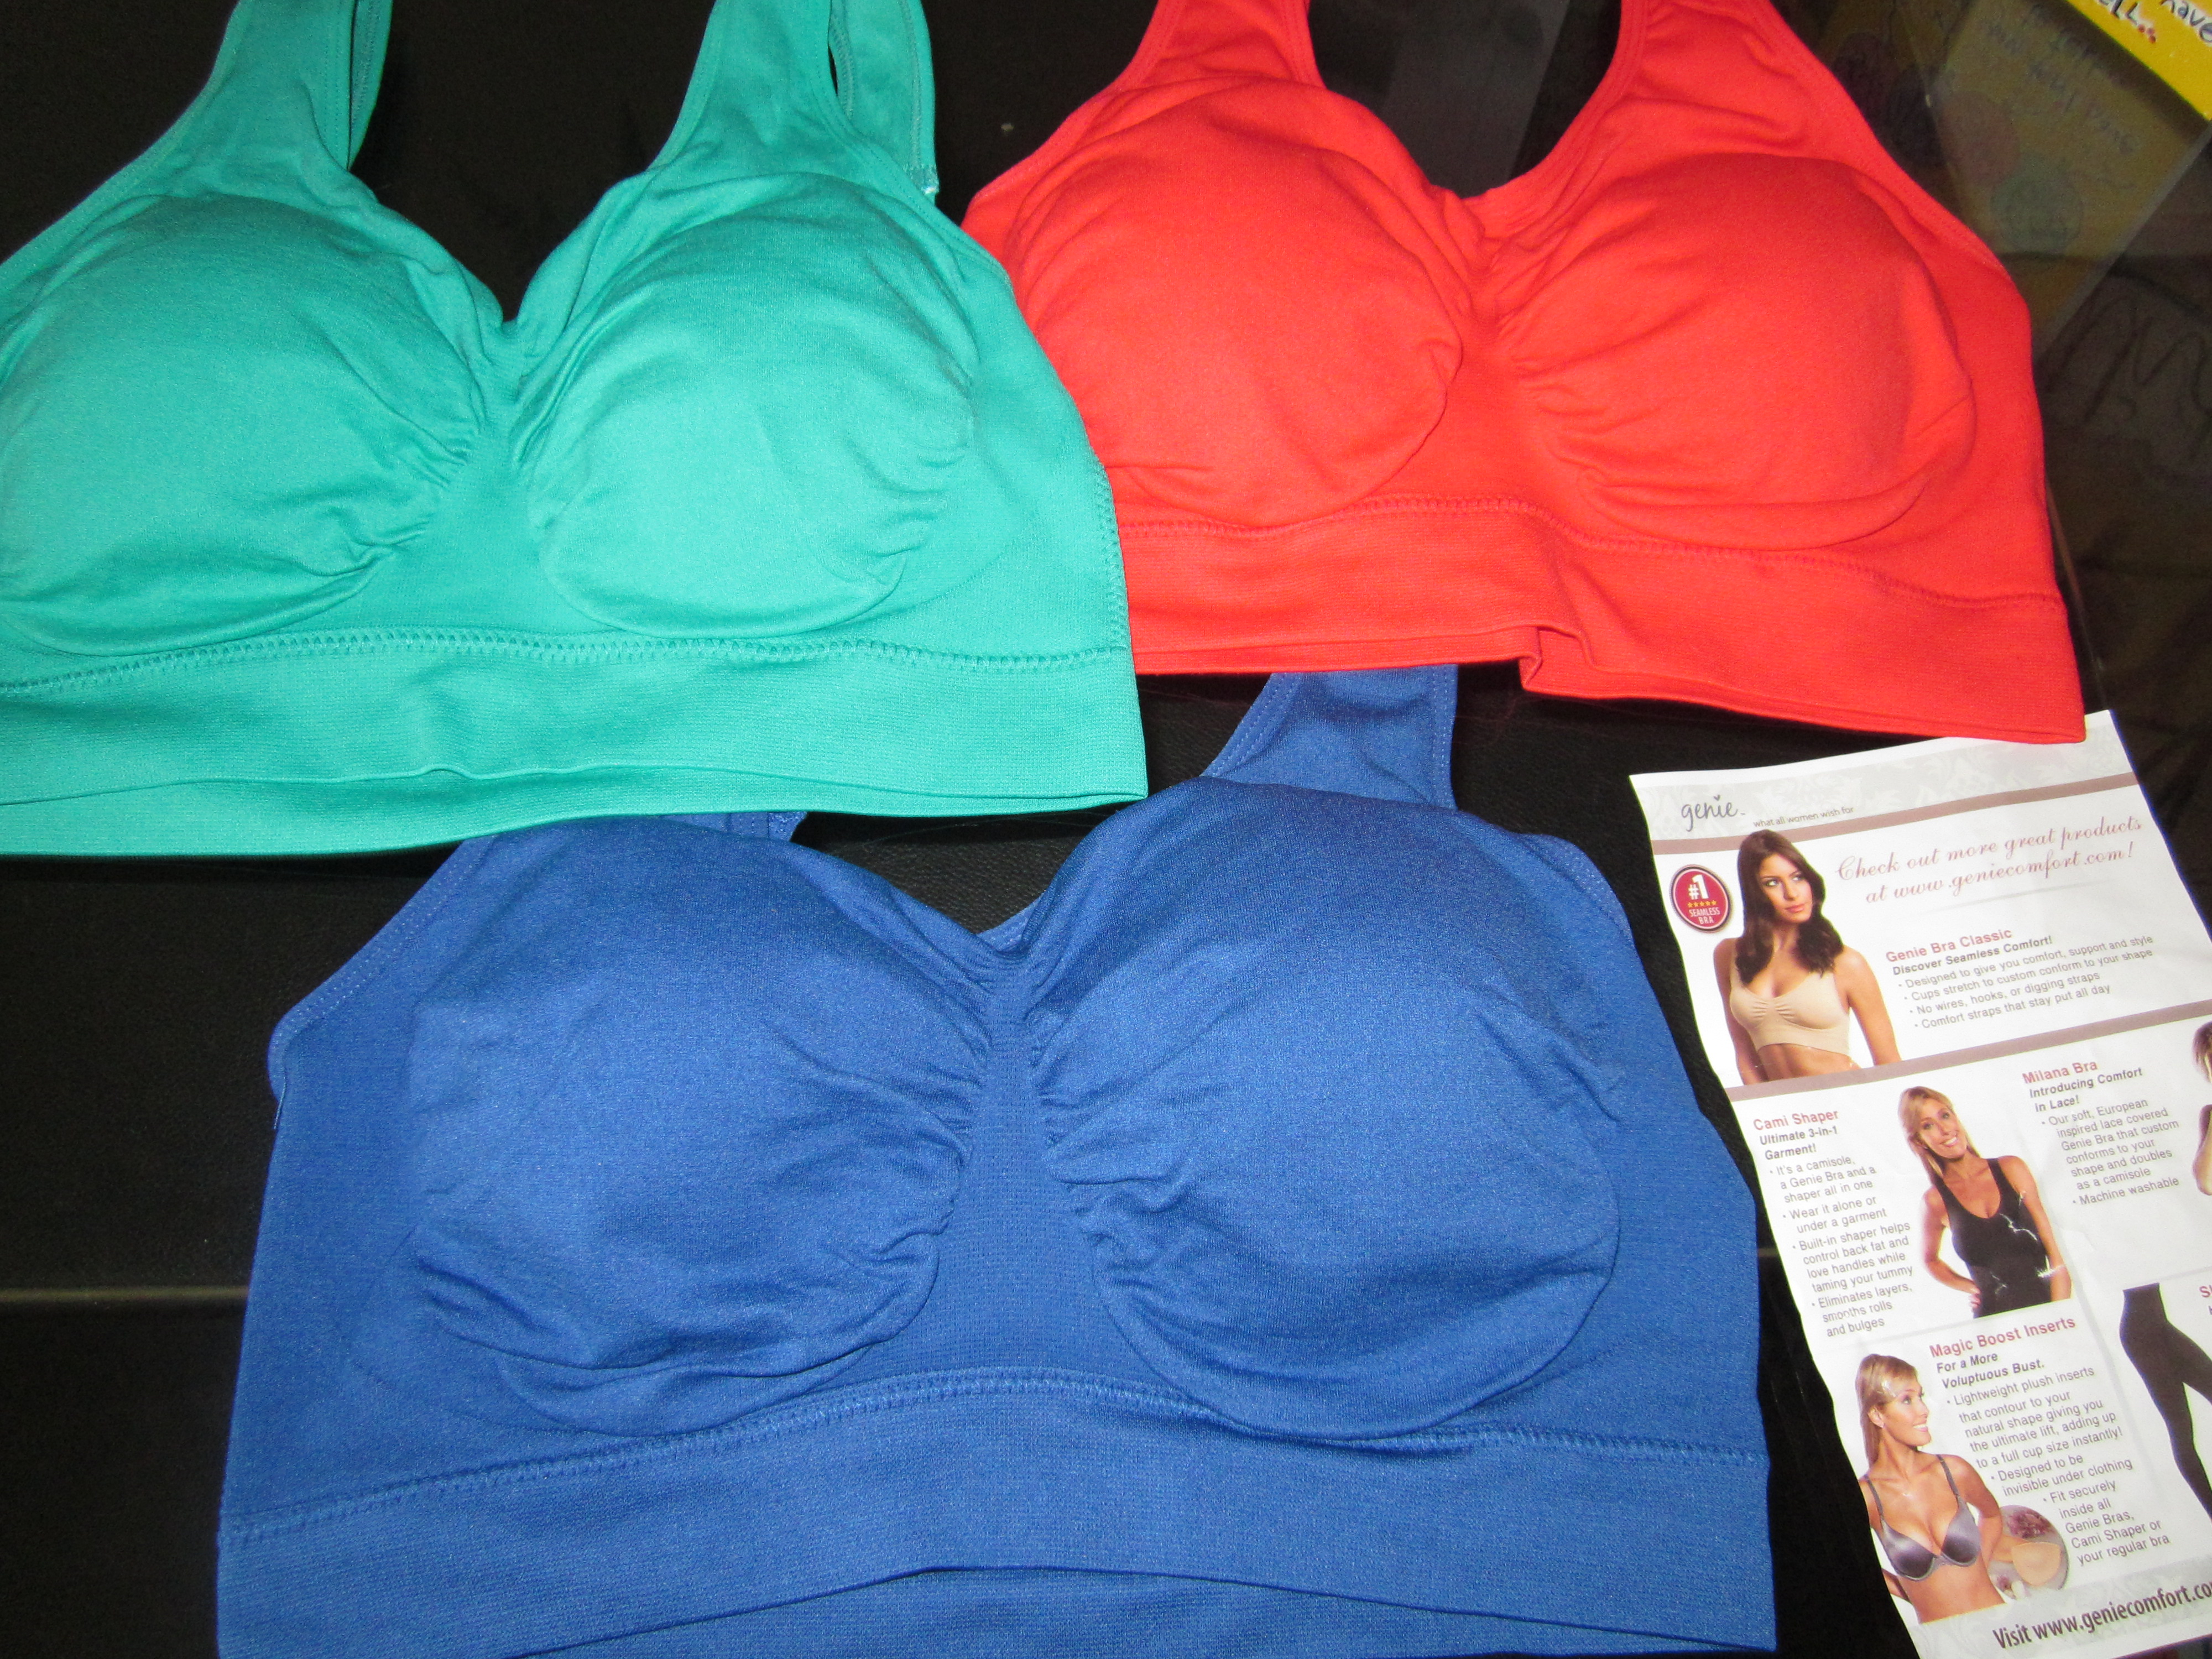 If you are looking for a Bra or a Cami, try out a Genie Bra Cami